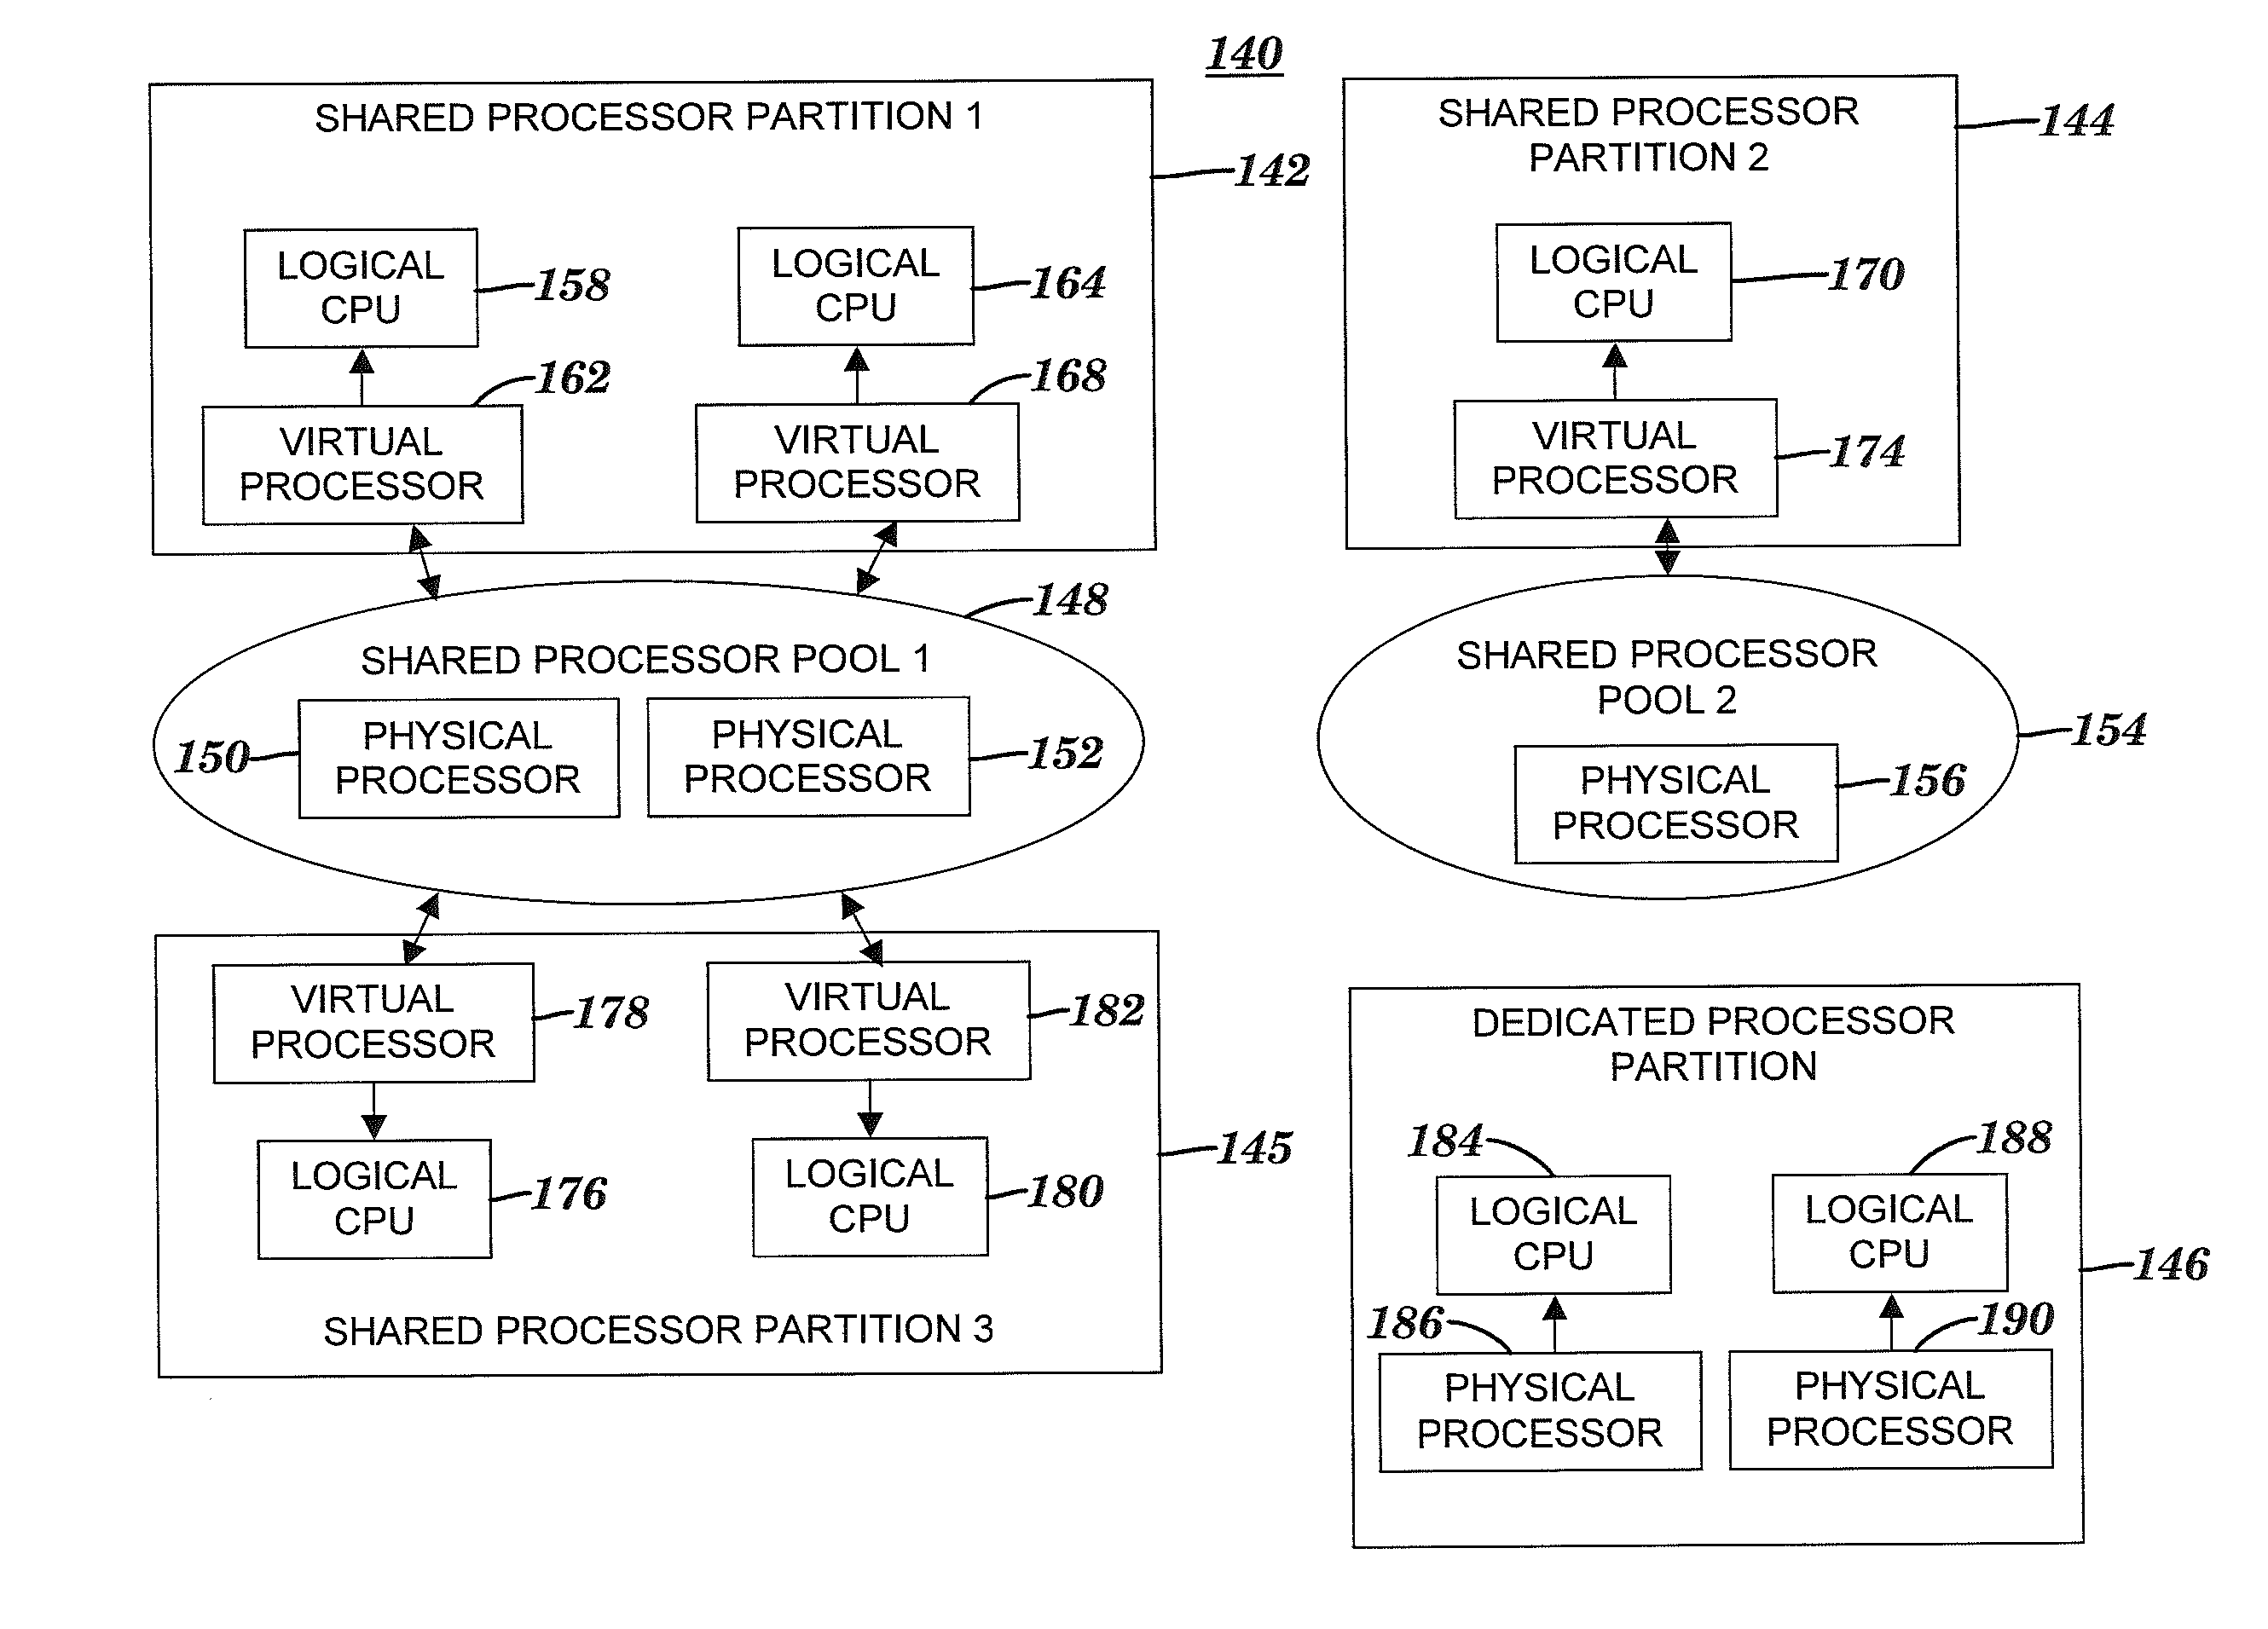 Method and system for assigning logical partitions to multiple shared processor pools